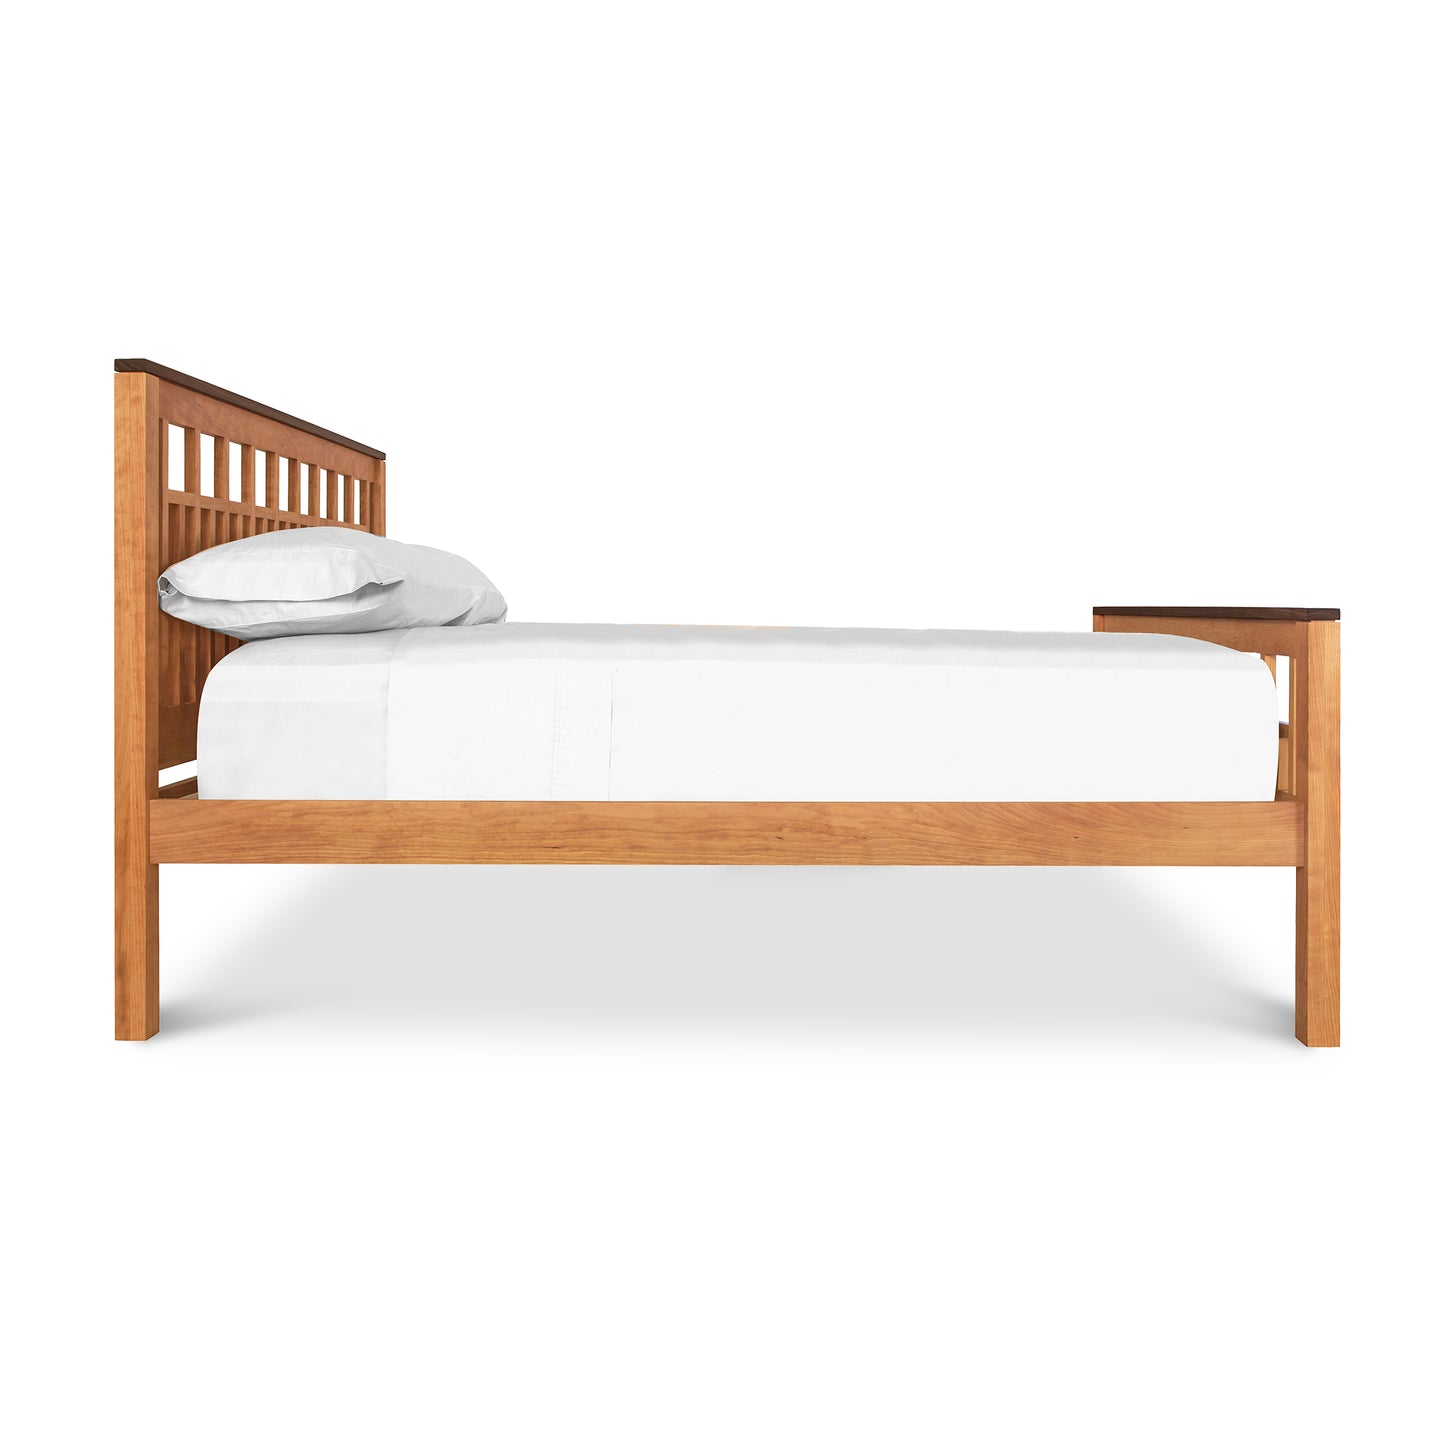 A high end, Vermont Furniture Designs Modern American Trellis Bed with white sheets on it.